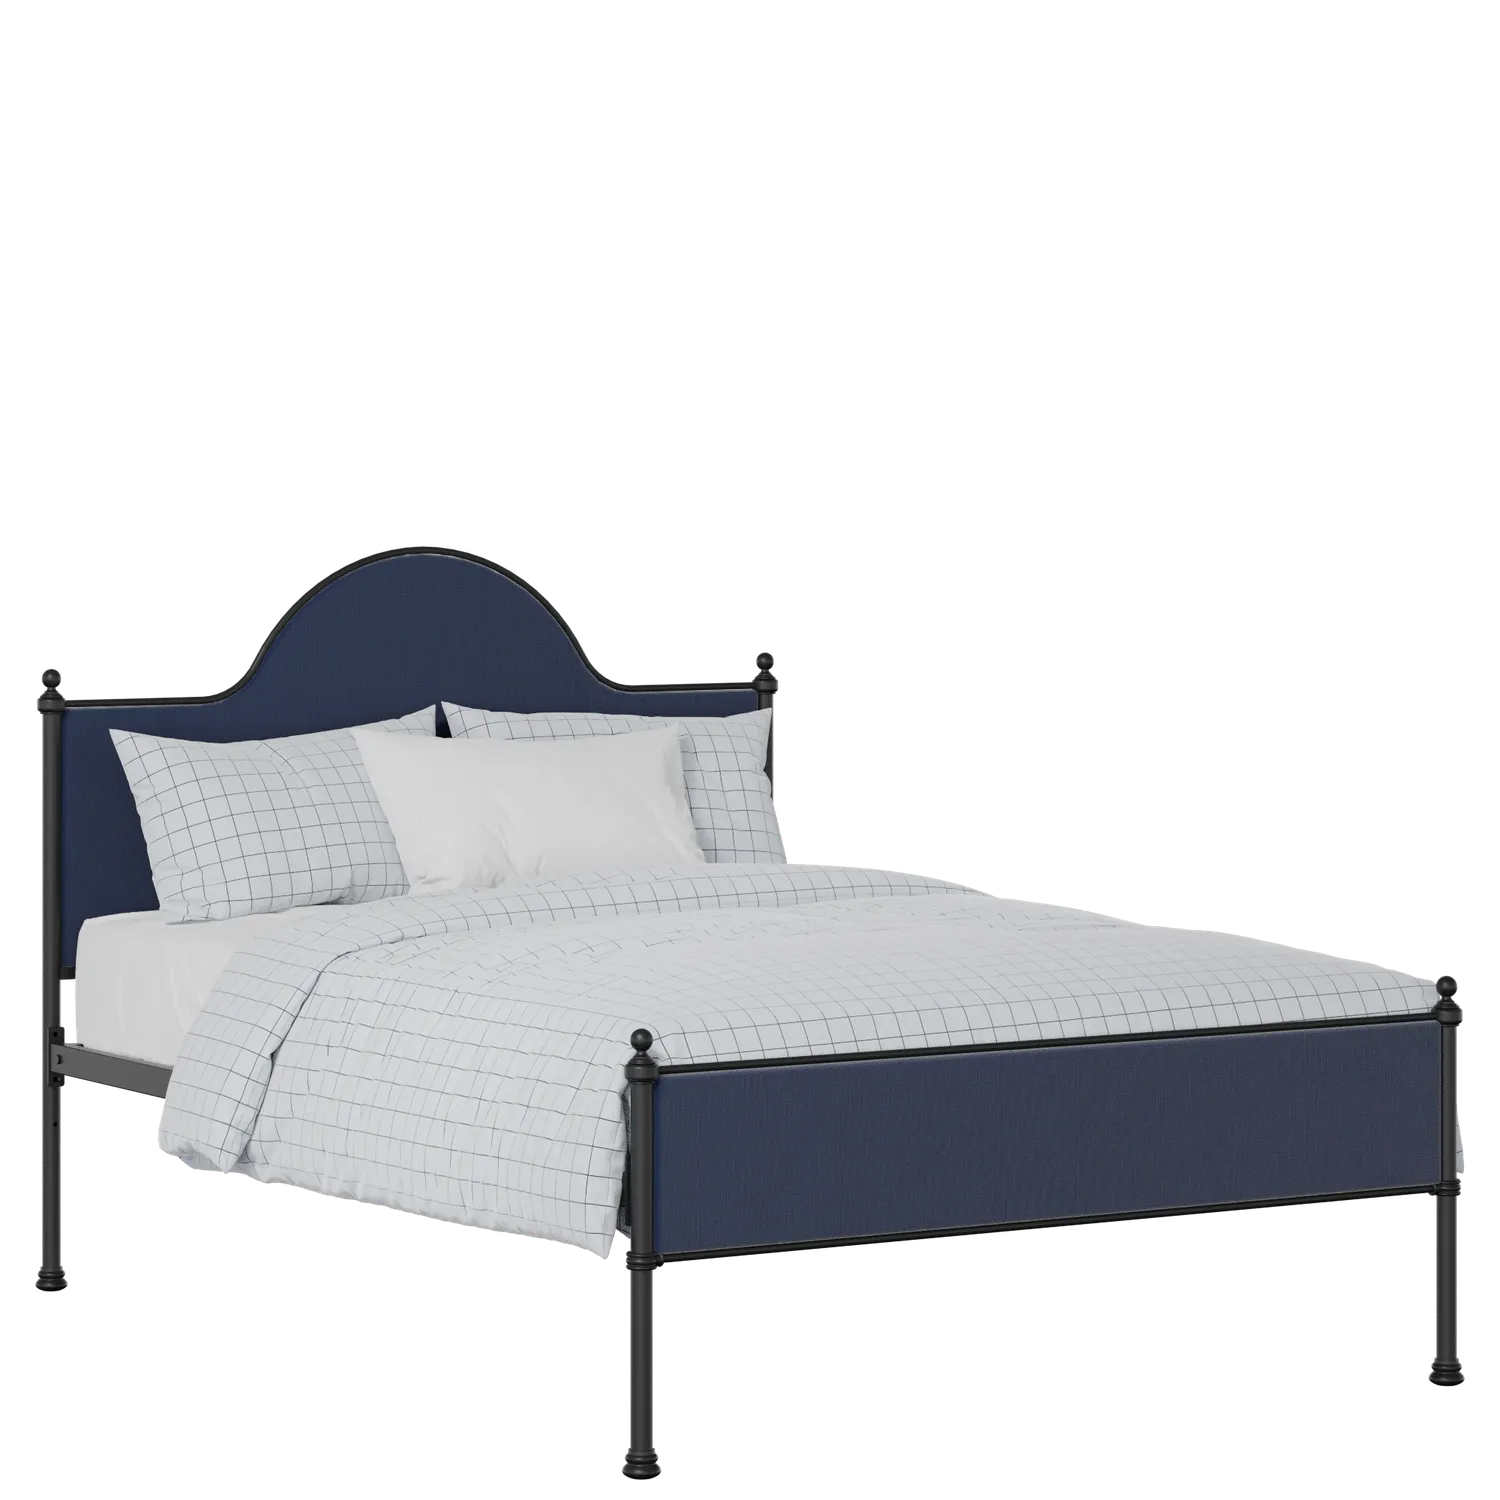 Albert Slim iron/metal upholstered bed in black with blue fabric